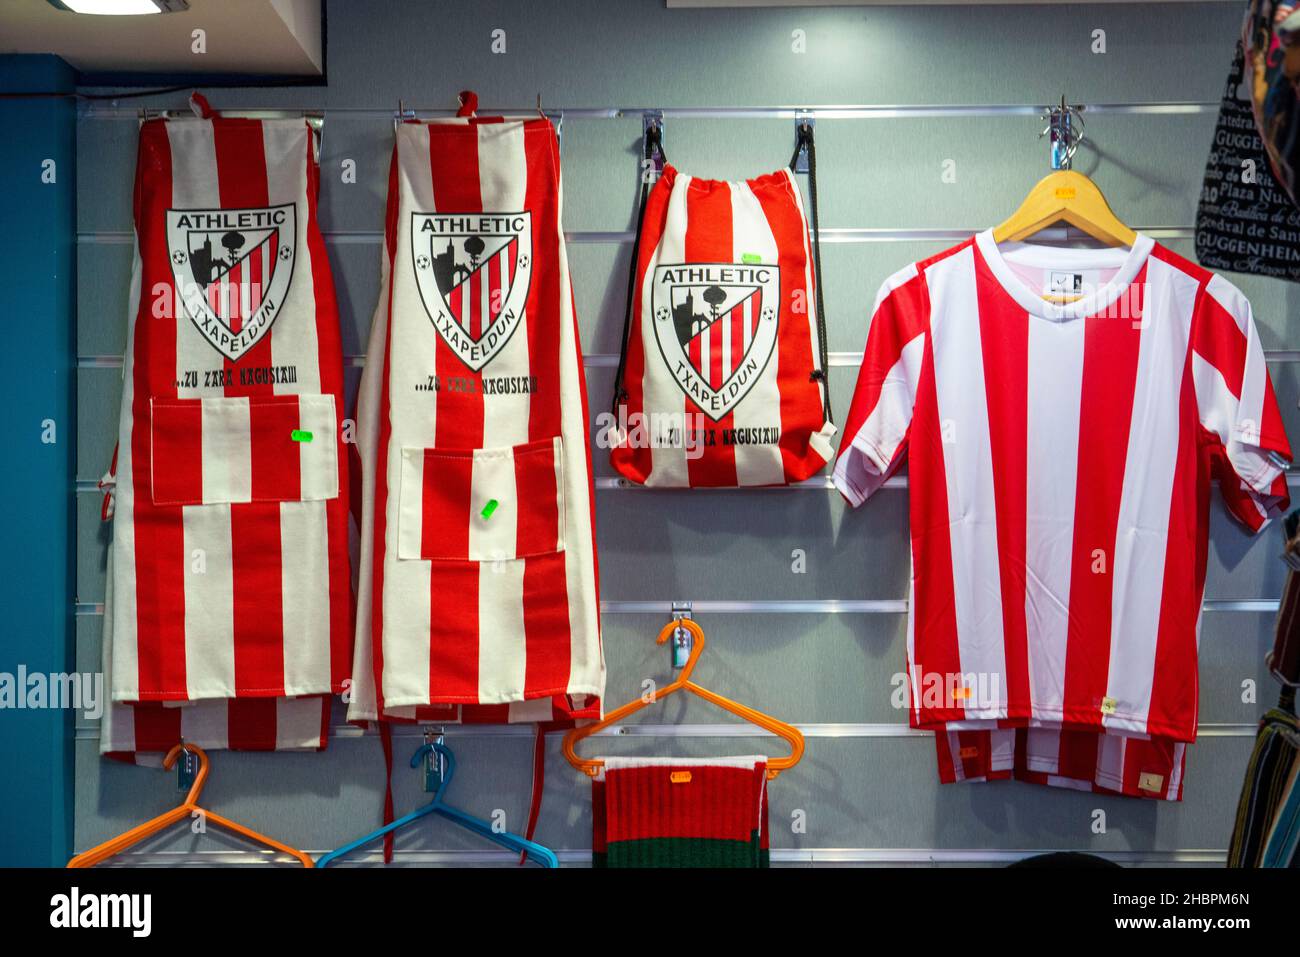 Bilbao athletic Bilbao shop t shirts in the old town in the city centre of Bilbao - Basque region of northern Spain Stock Photo